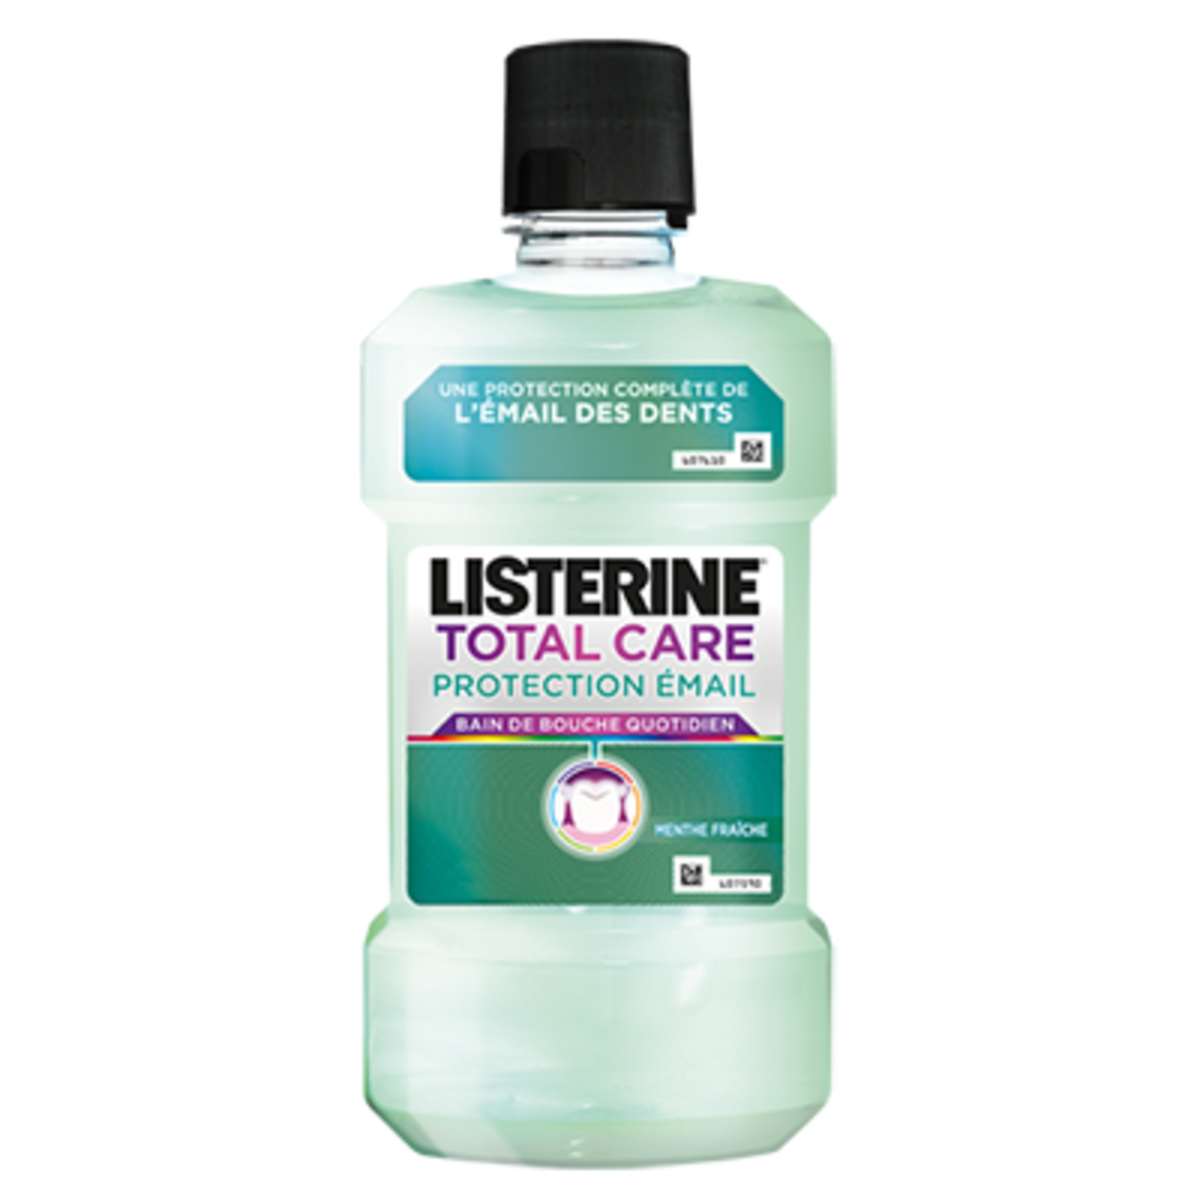 listerine-total-care-protection-email-500ml-500-0-ml-total-care